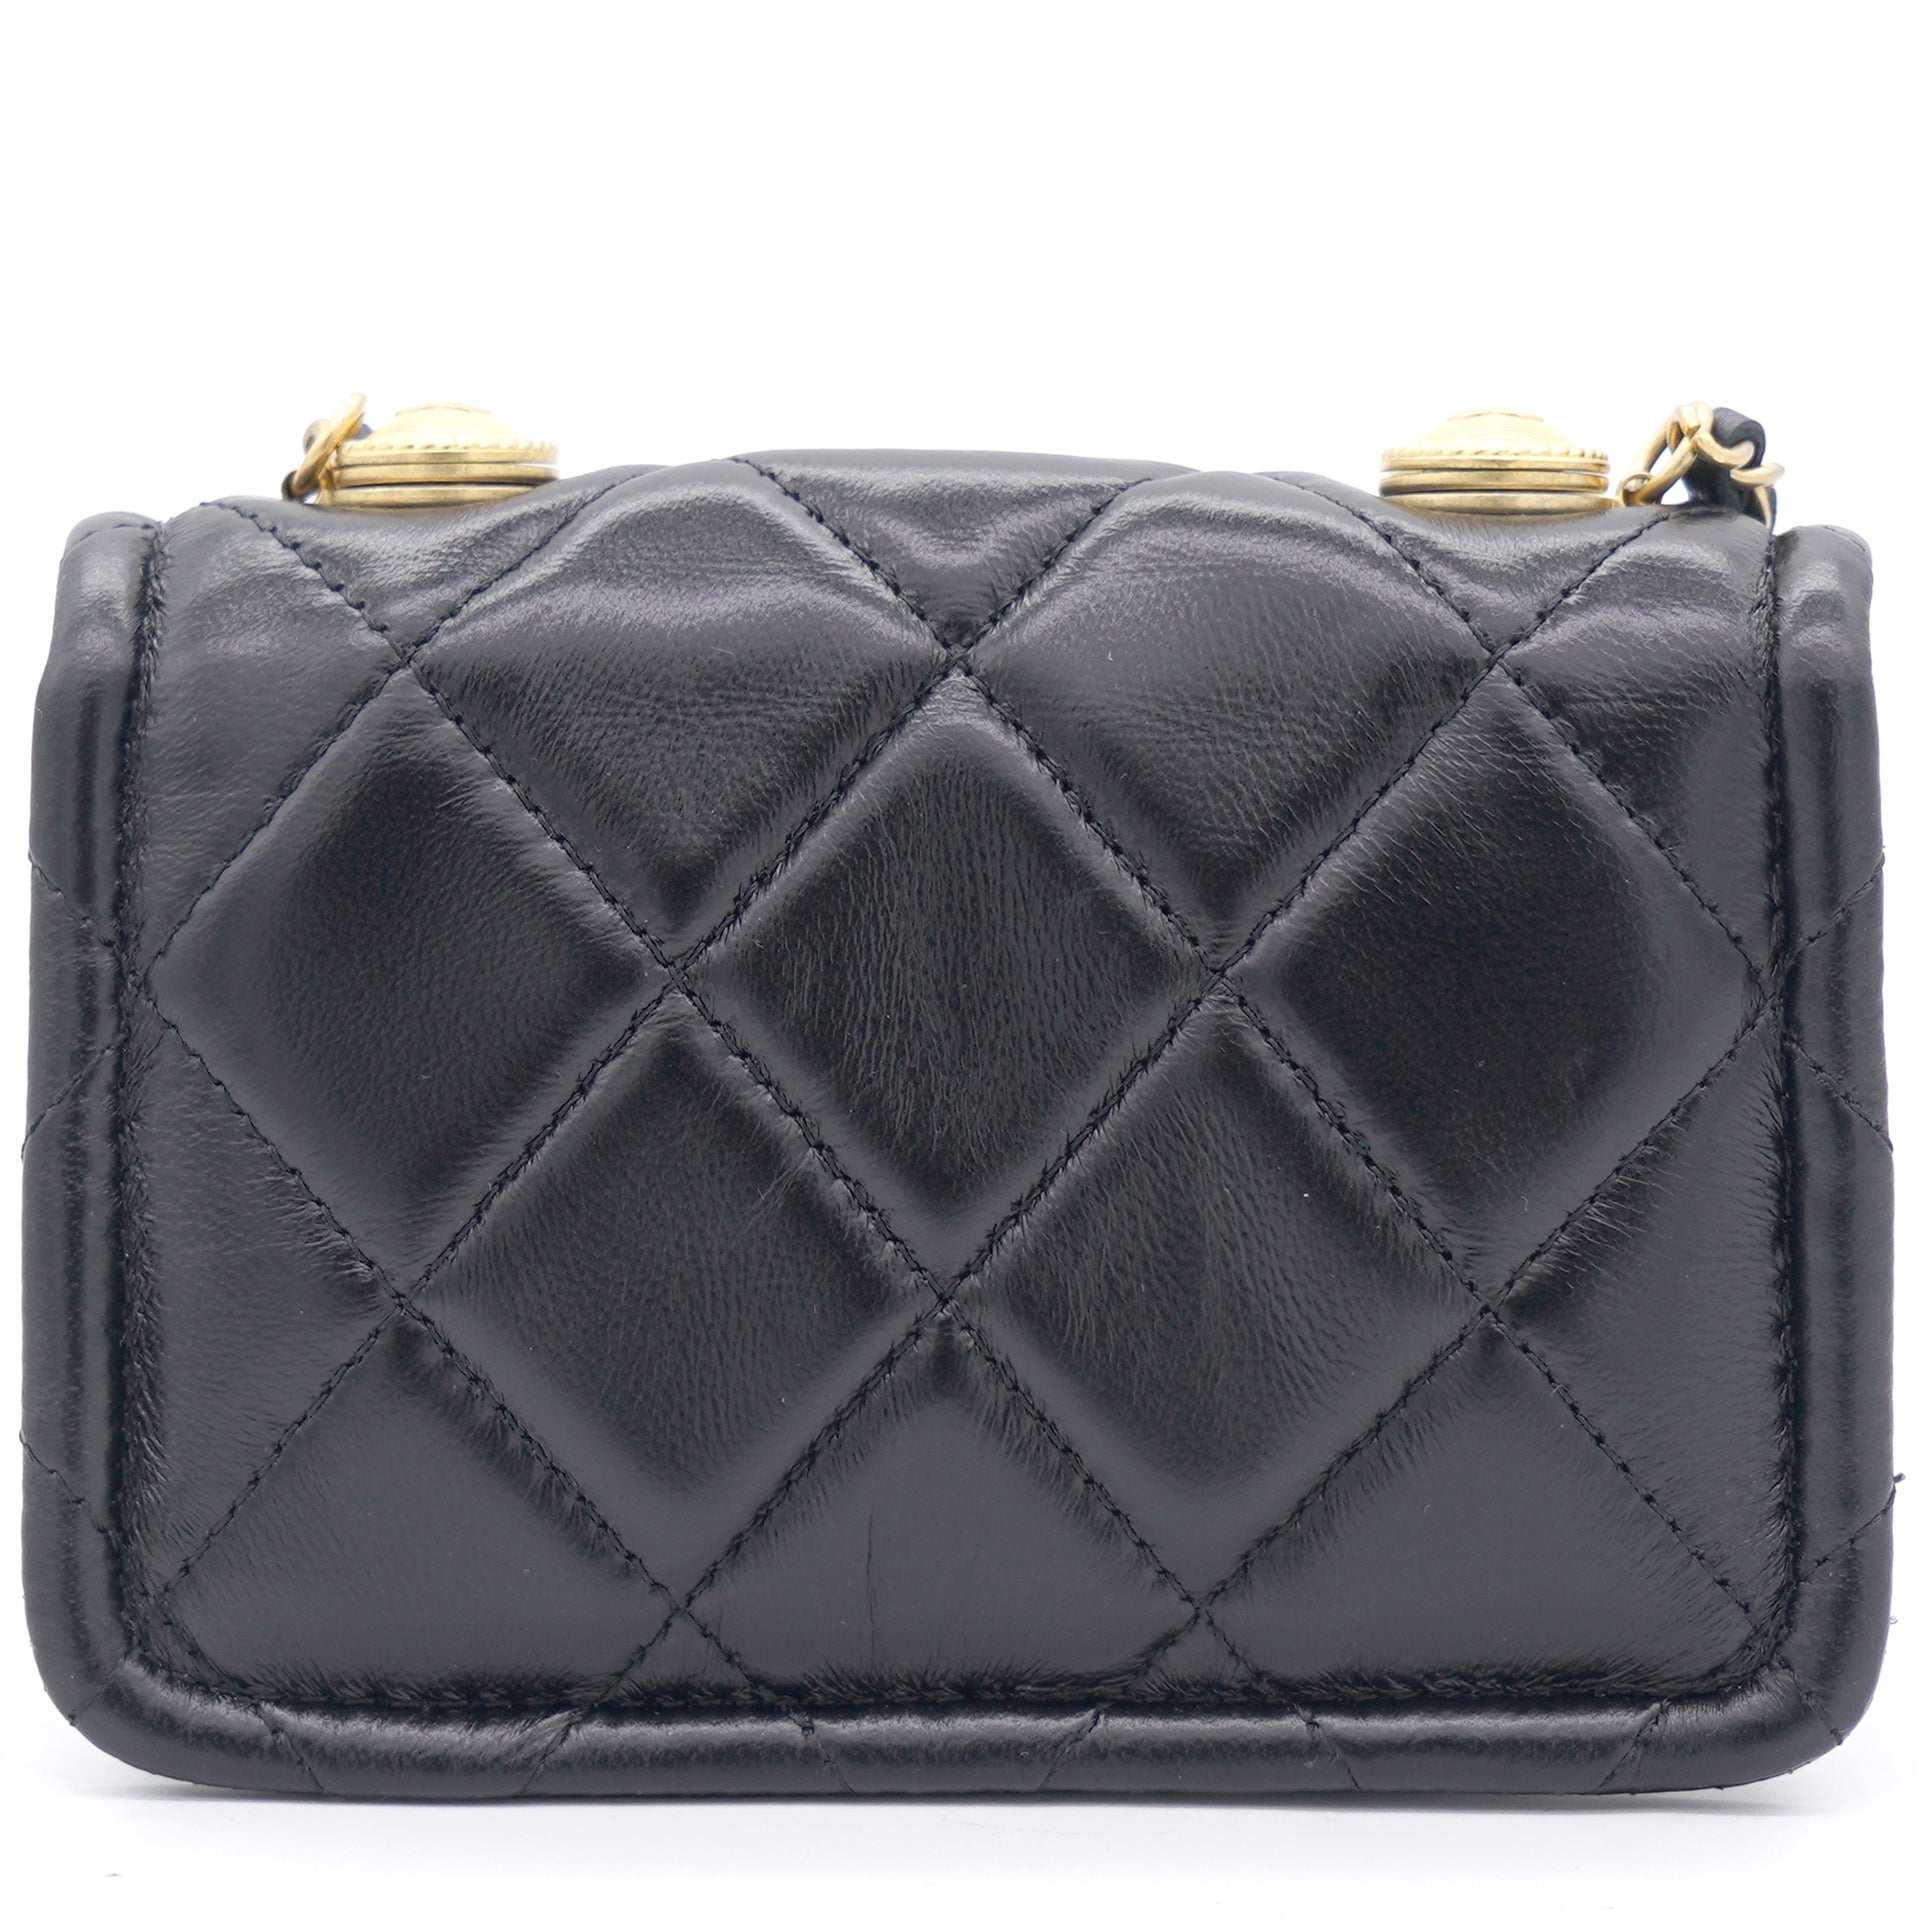 Lambskin Quilted Nano Flap Bag with button details Black